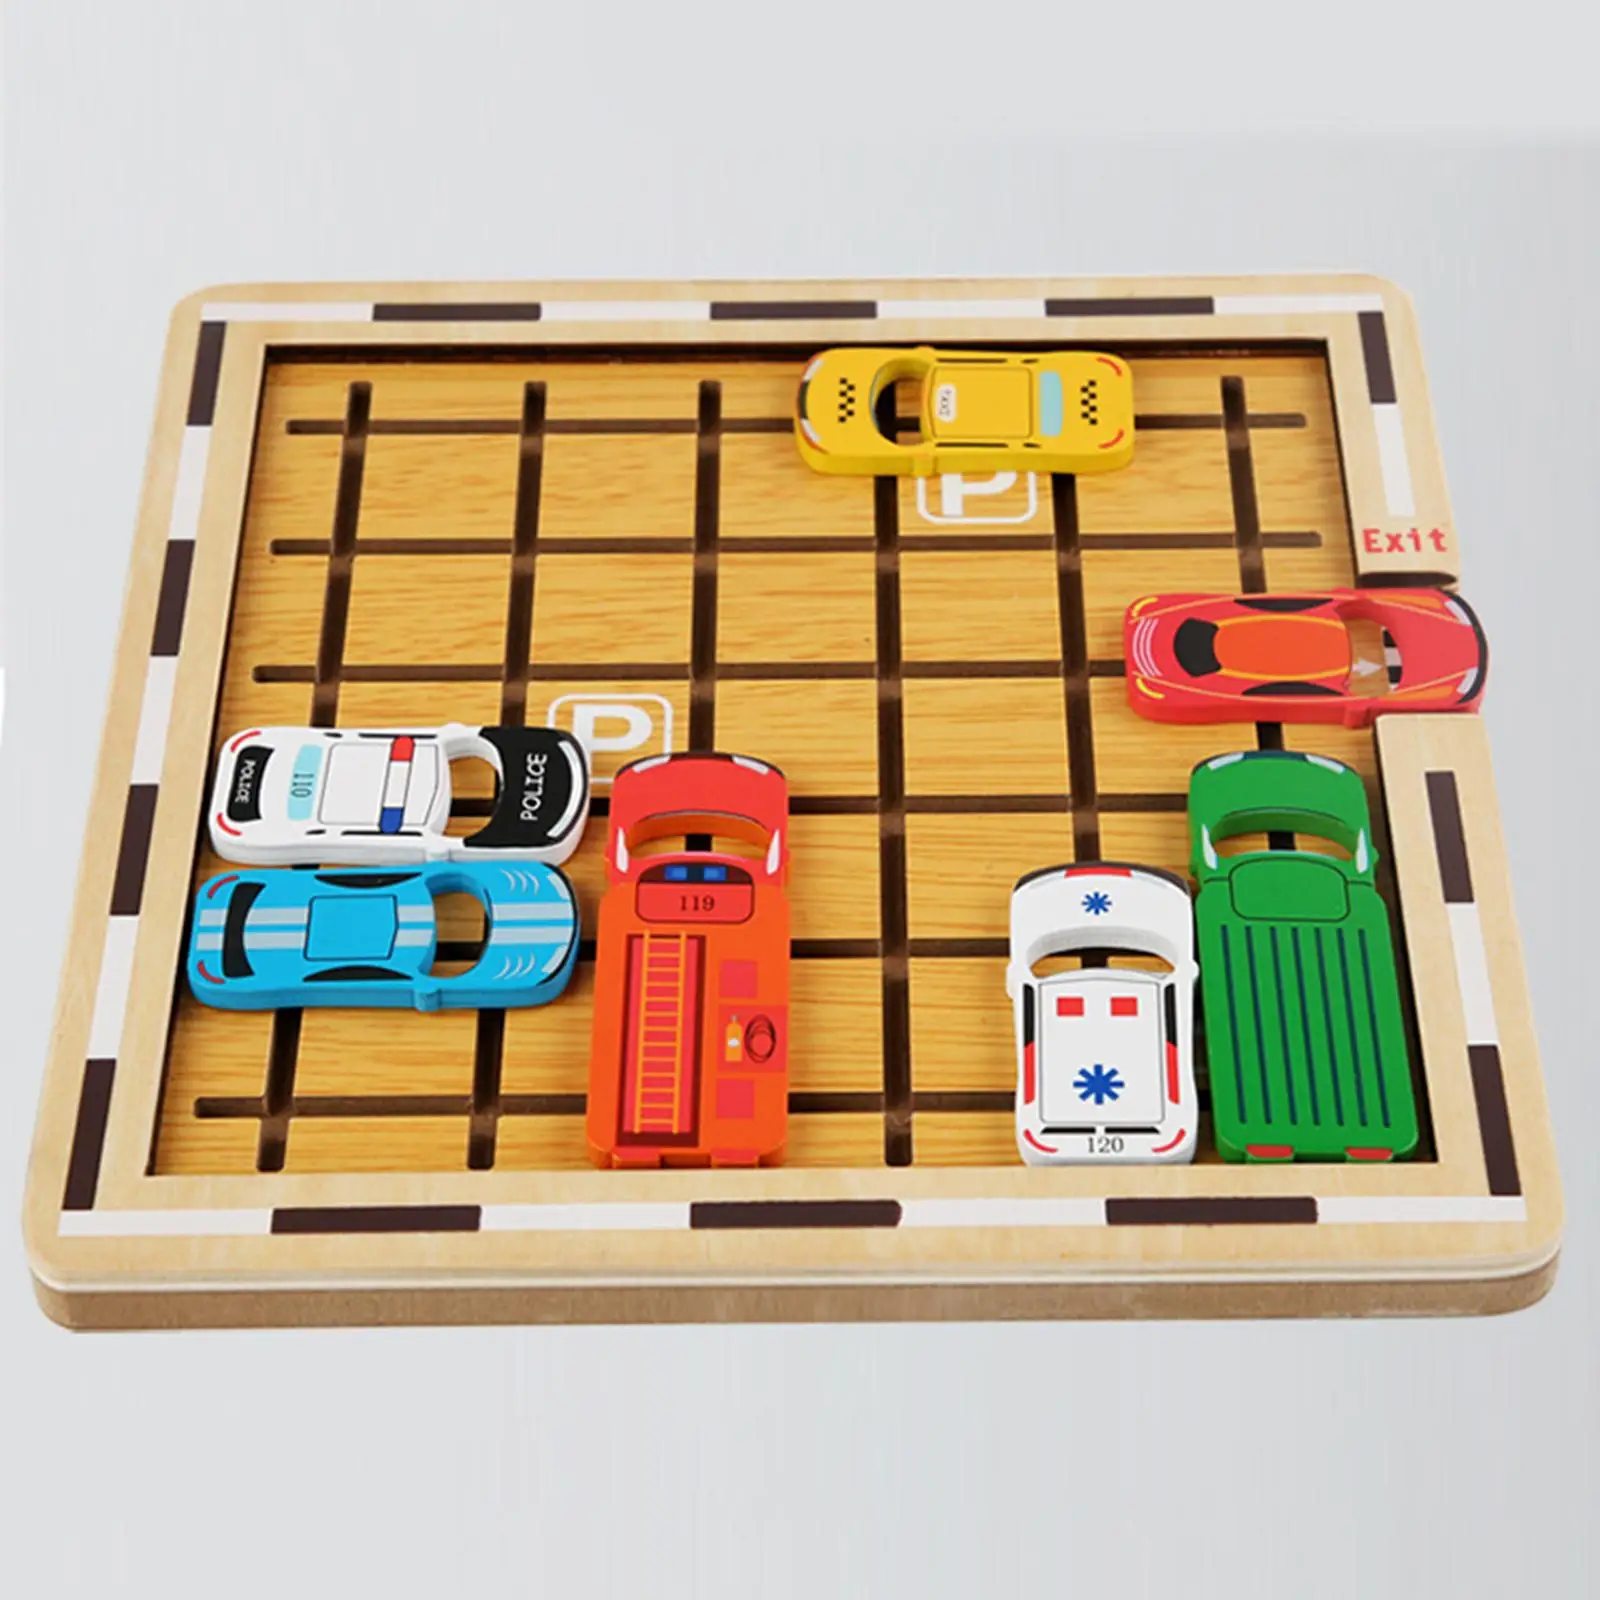 Wooden Early Education Car Logical Thinking Training Exercise Brain Ability Sensory Toy Development for Toddlers Kids Boys Gifts